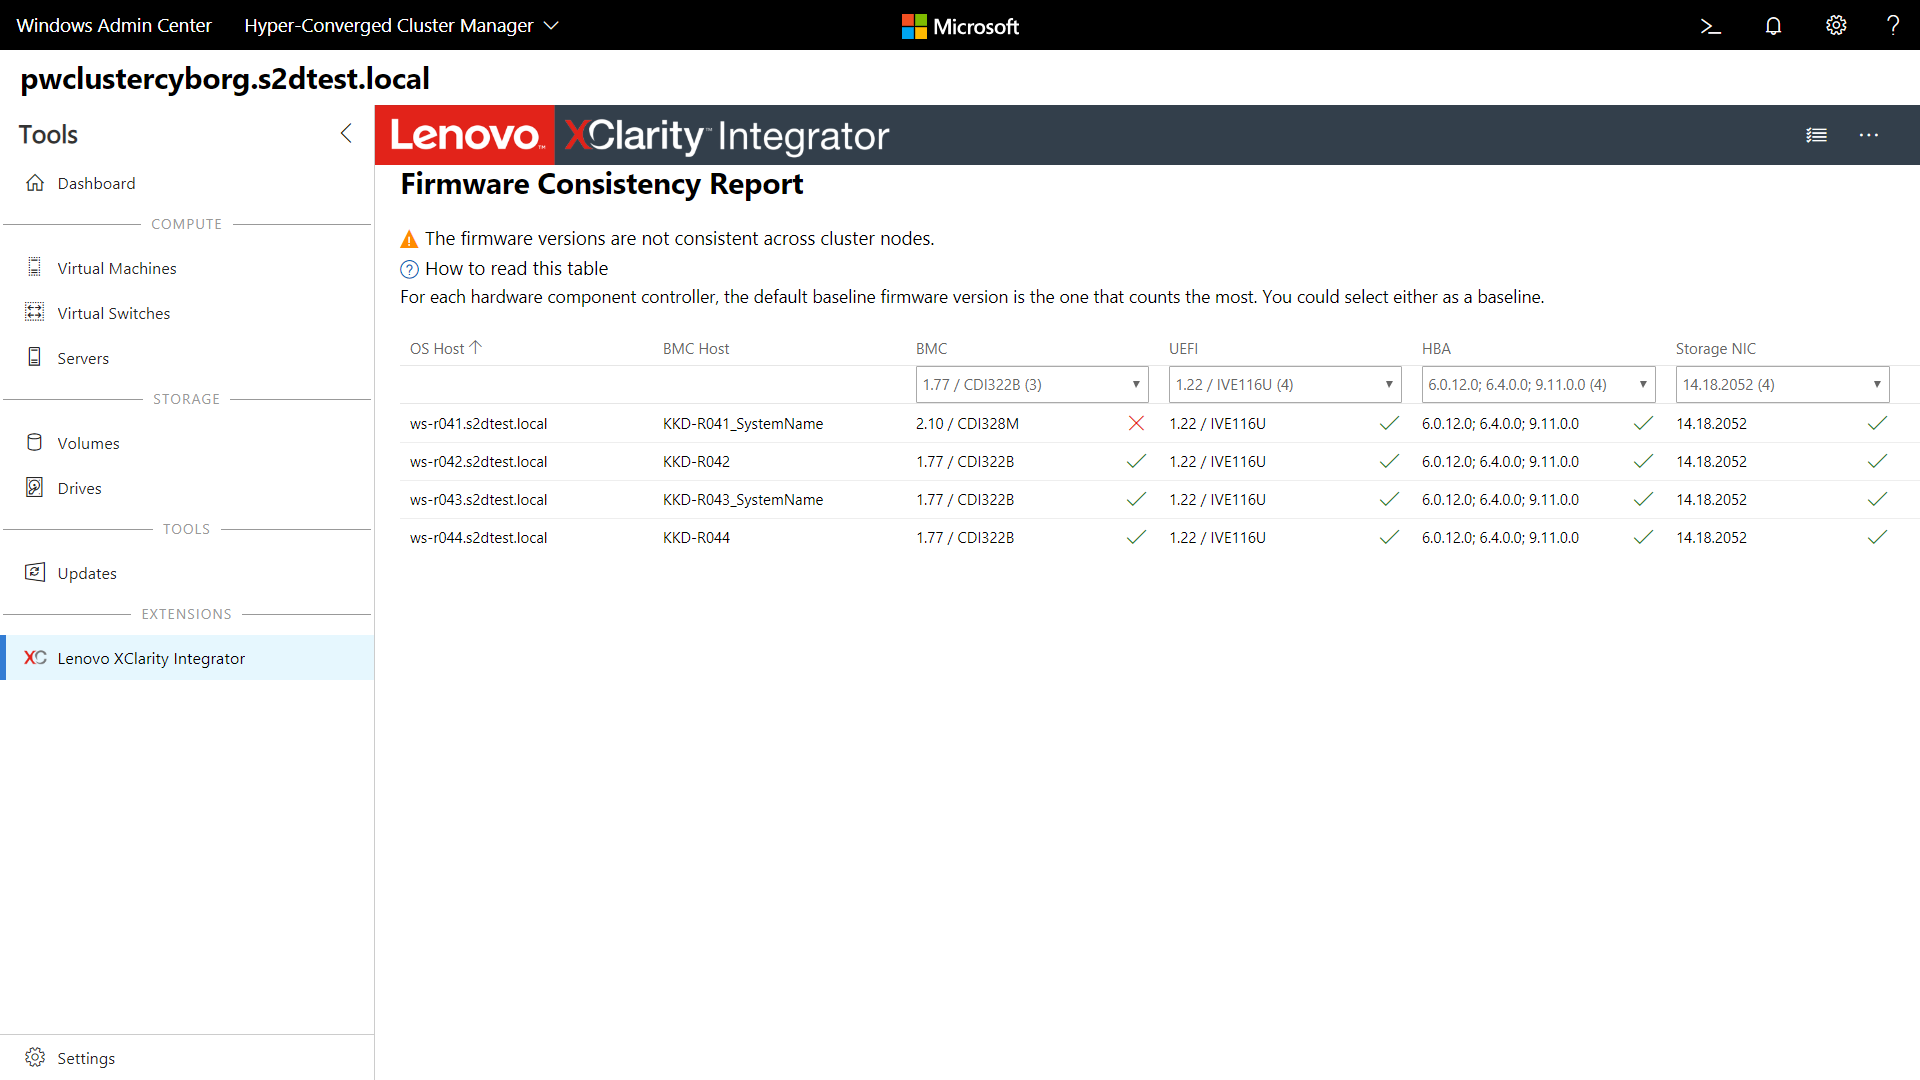 Screenshot of the Lenovo XClarity Integrator extension tool showing the Firmware Consistency Report page.